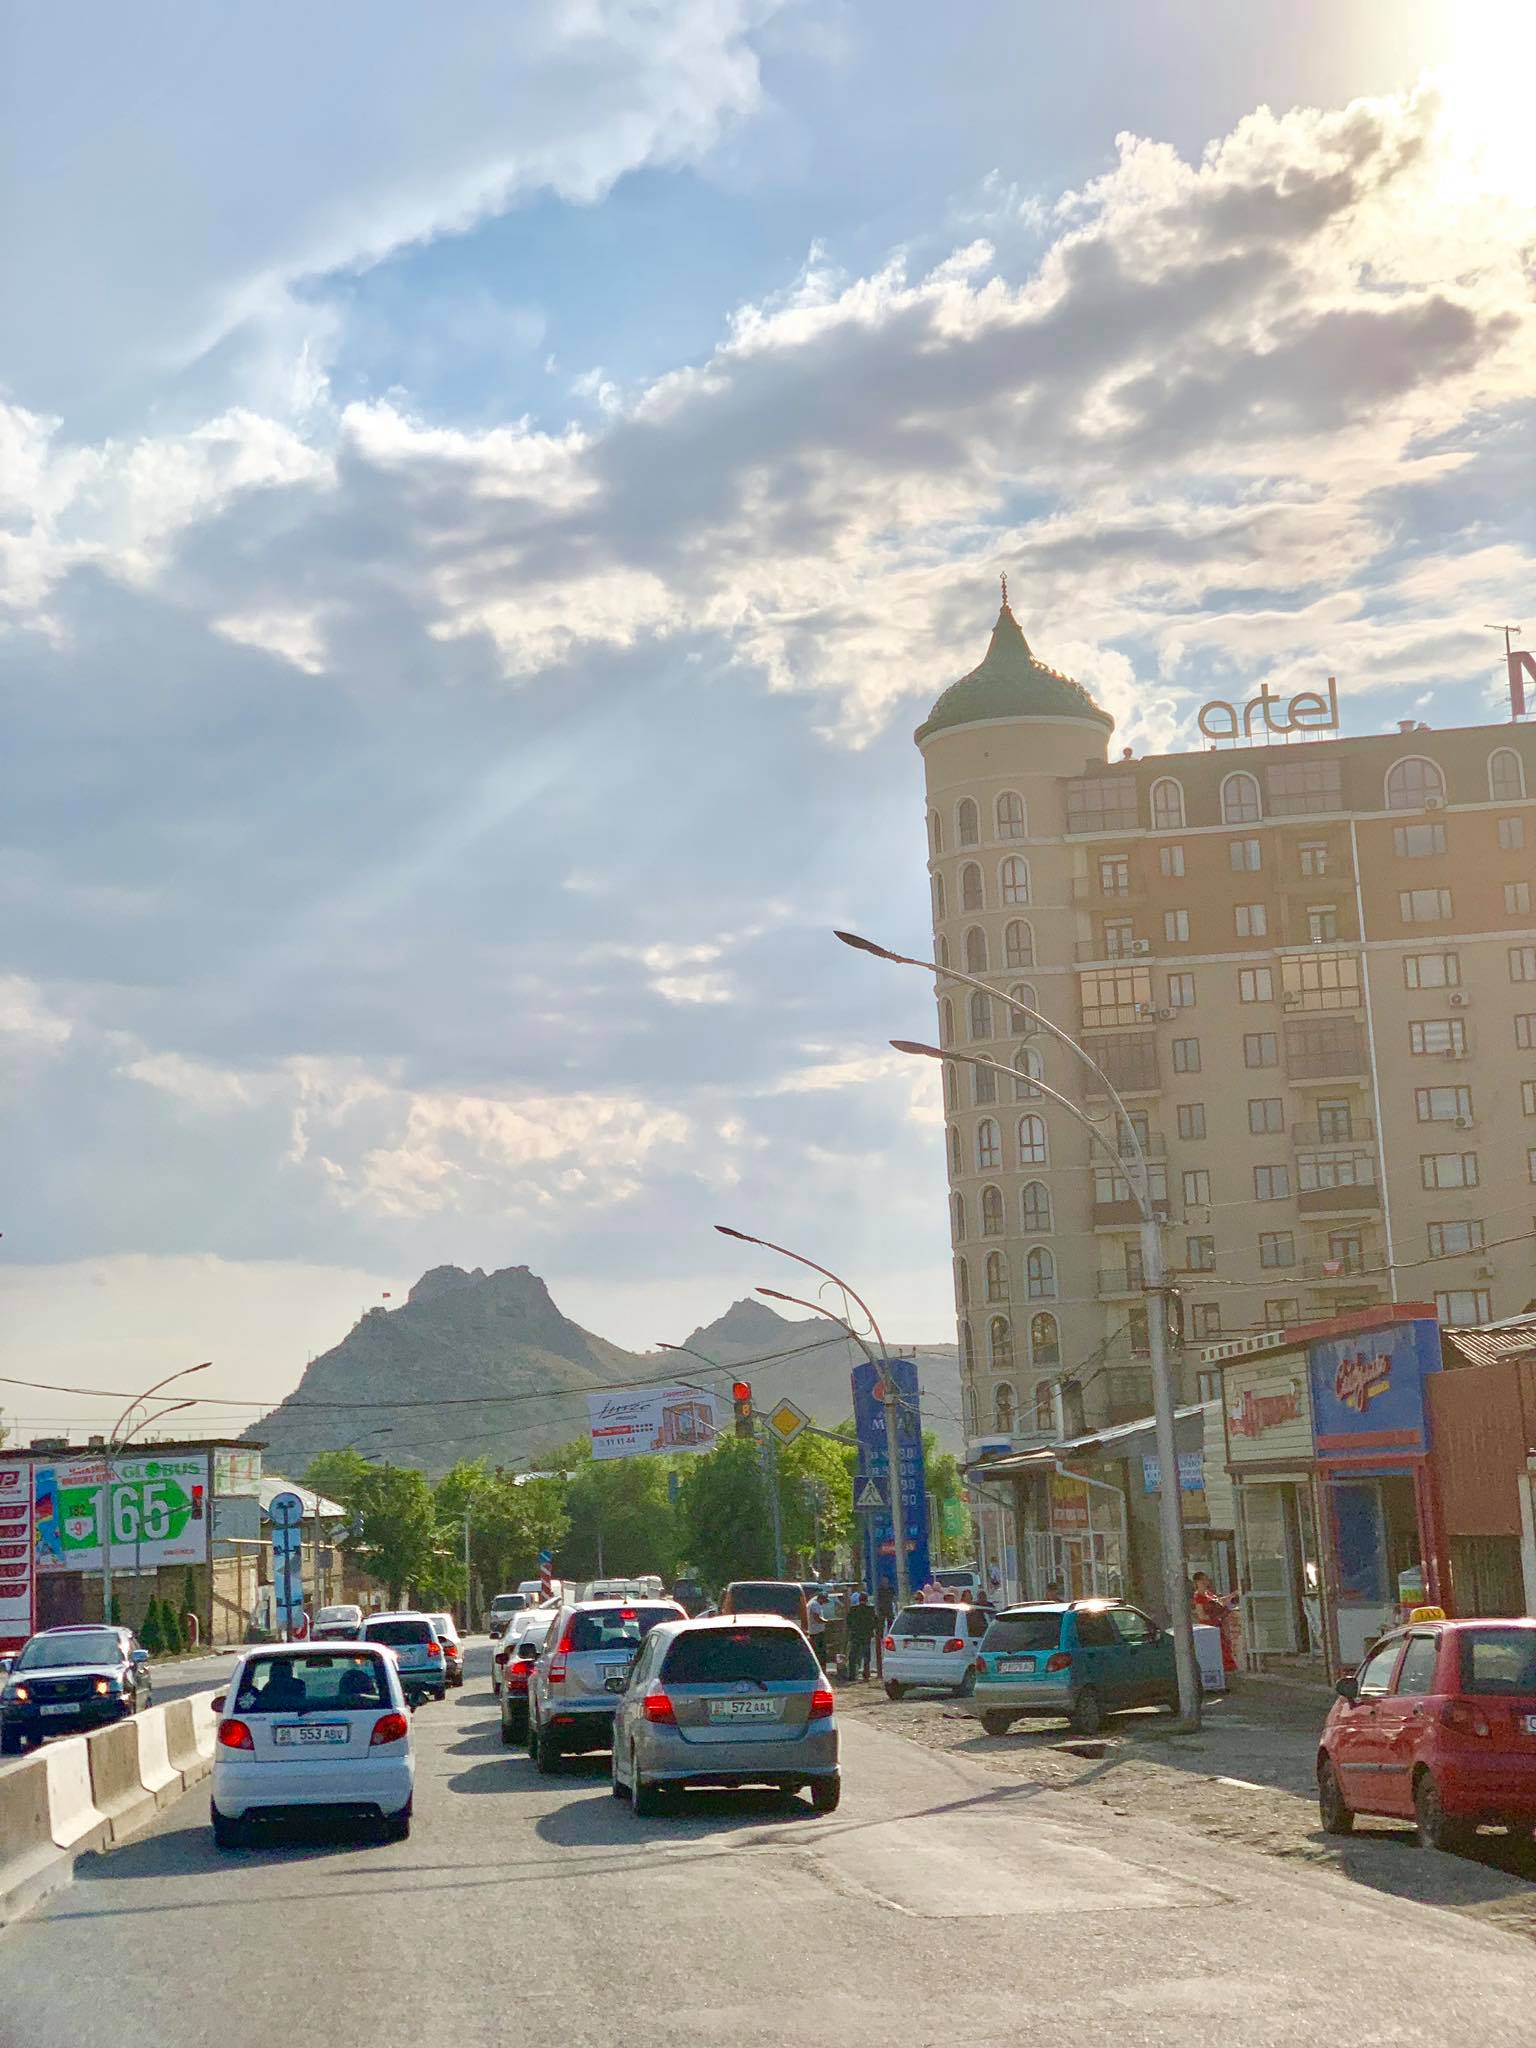 Kach Solo Travels in 2019 Hello from KYRGYZSTAN, my 128th country30.jpg